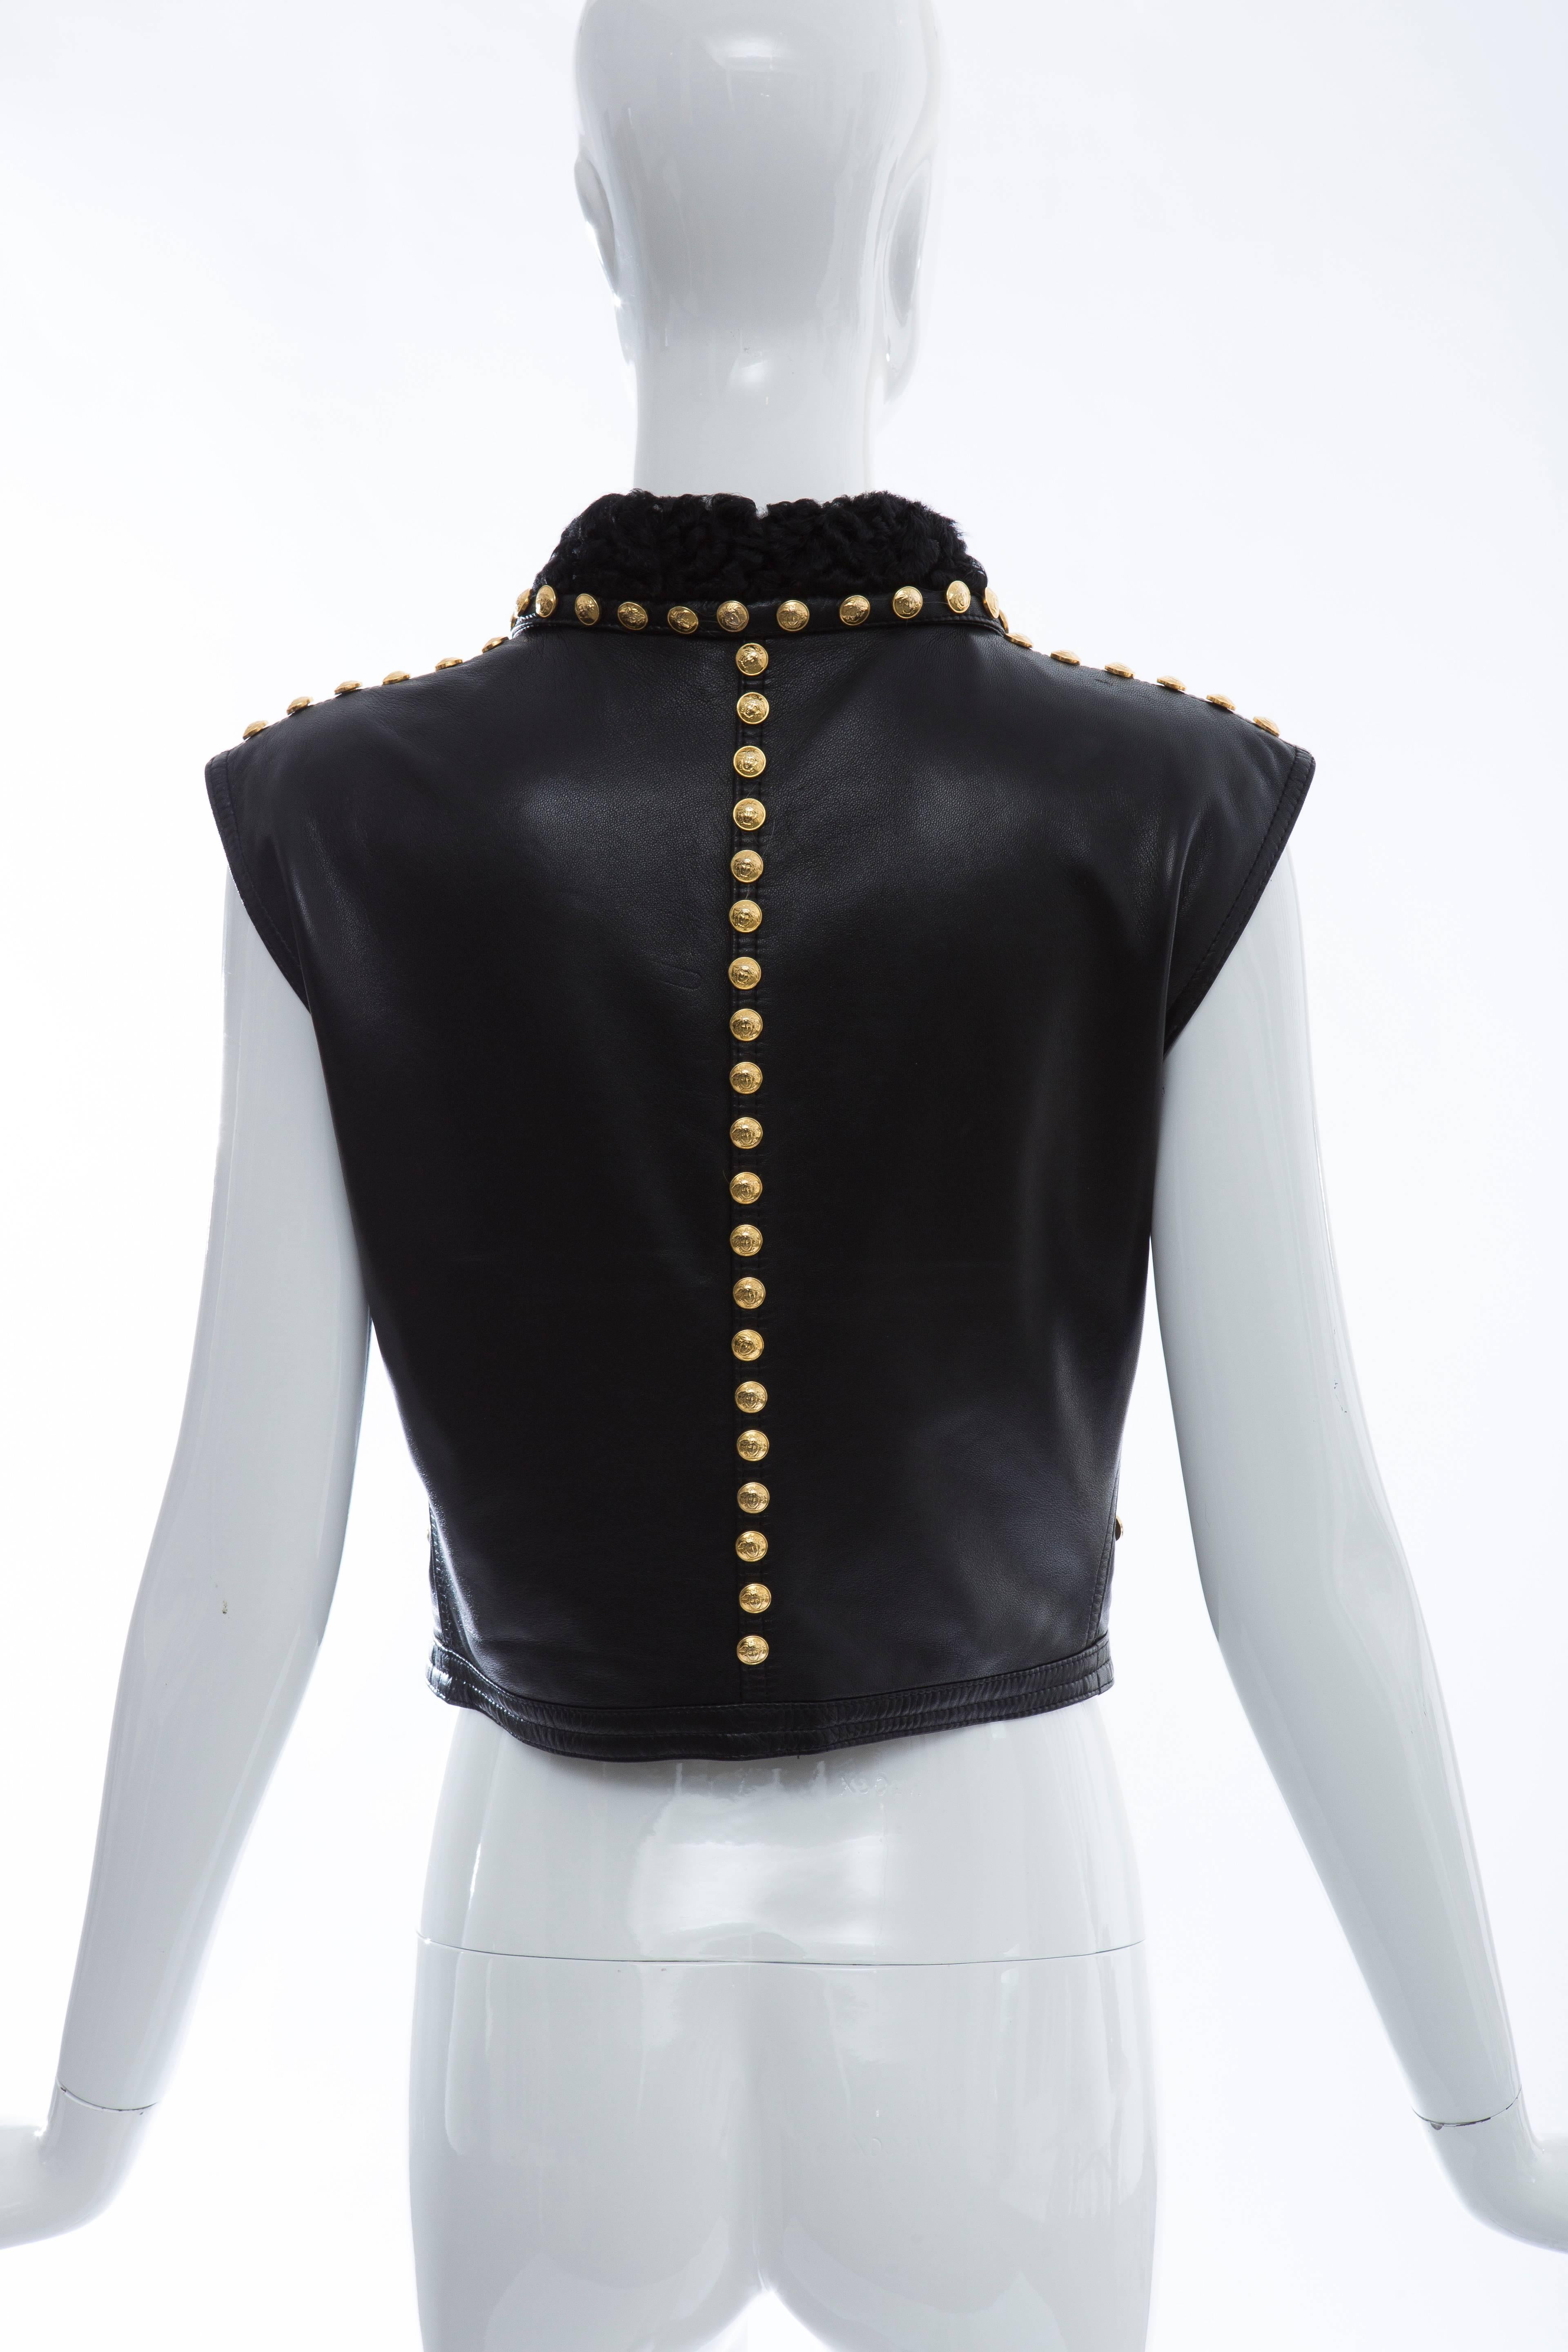 Women's Gianni Versace Black Studded Leather Vest With Persian Lamb Collar, Circa 1990's